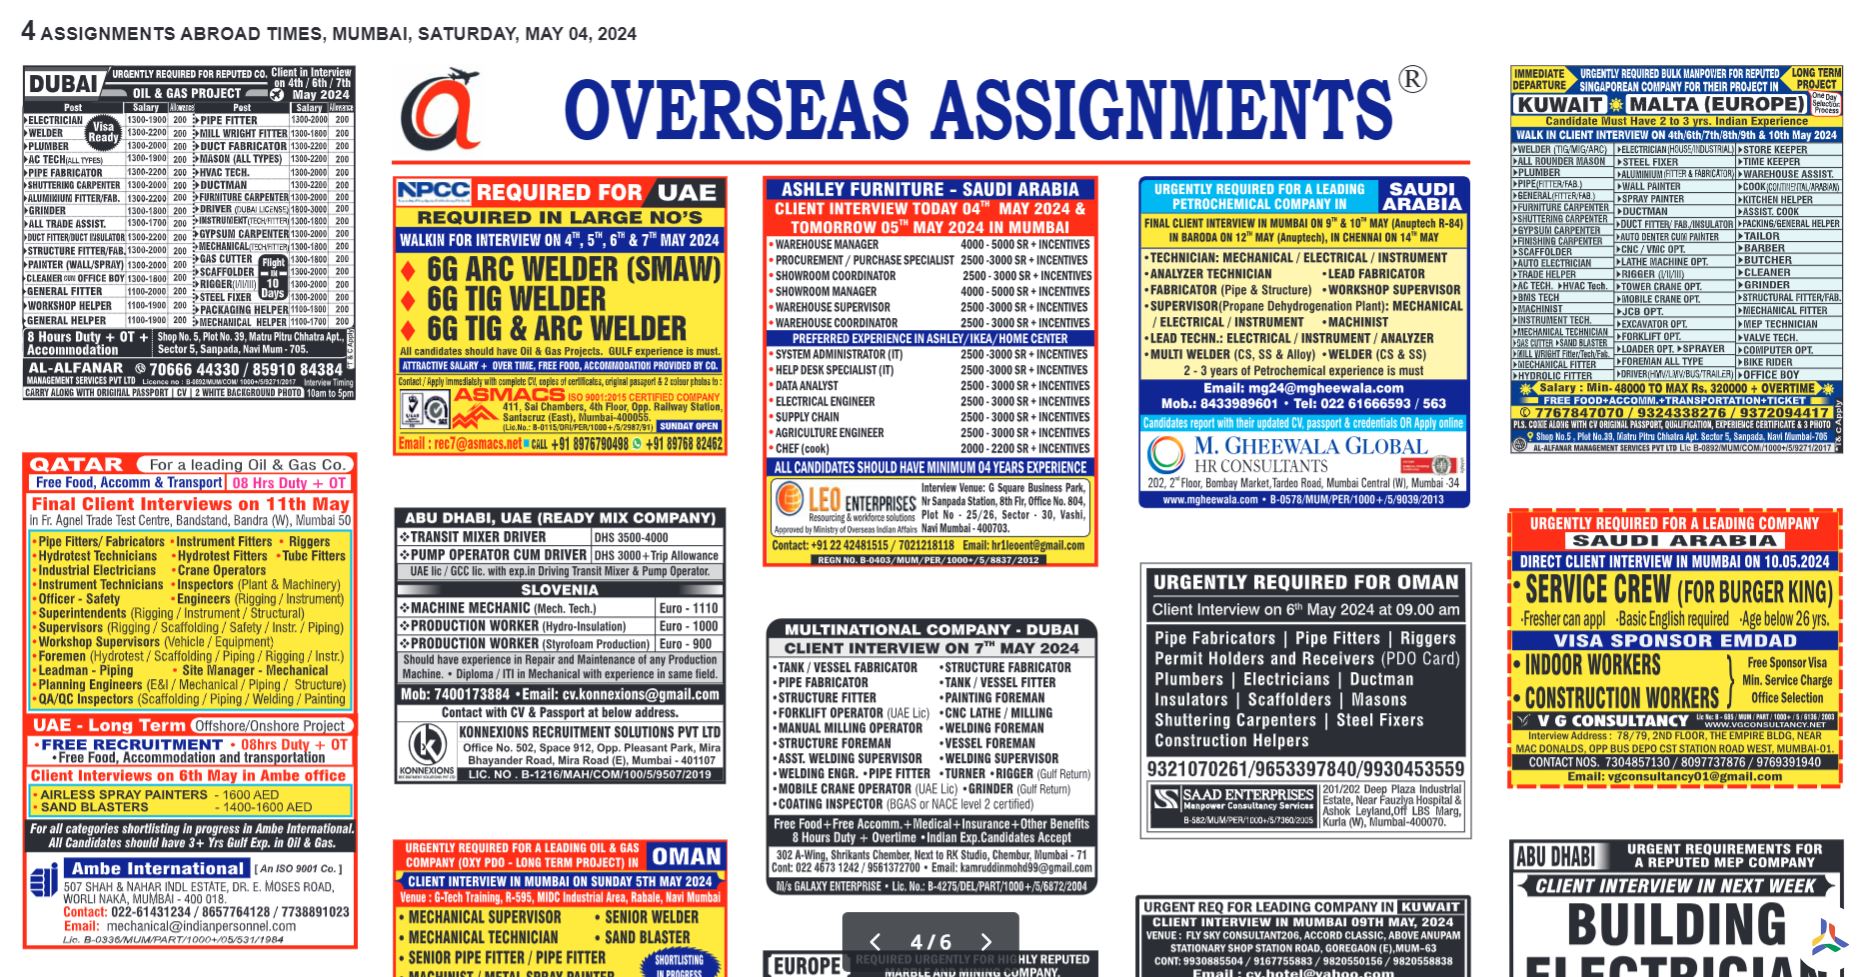 e paper assignment abroad